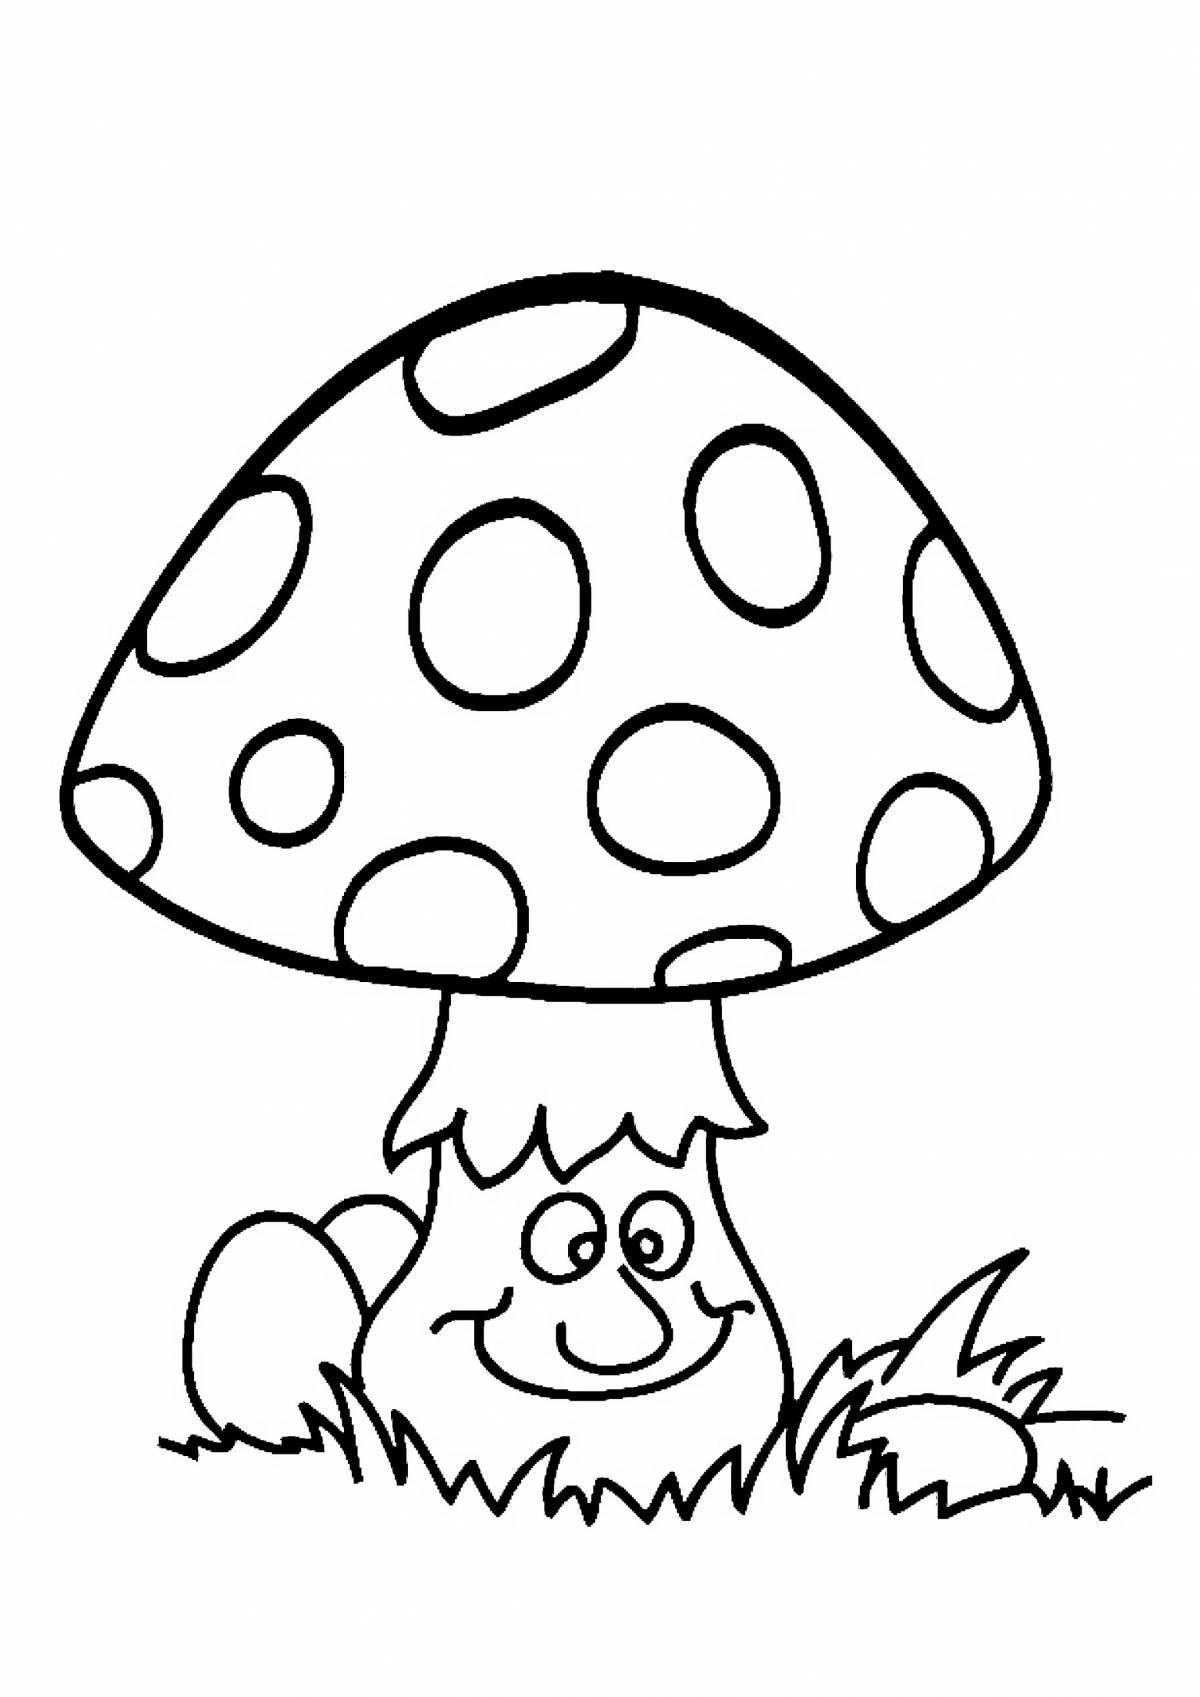 Incredible fly agaric drawing for kids